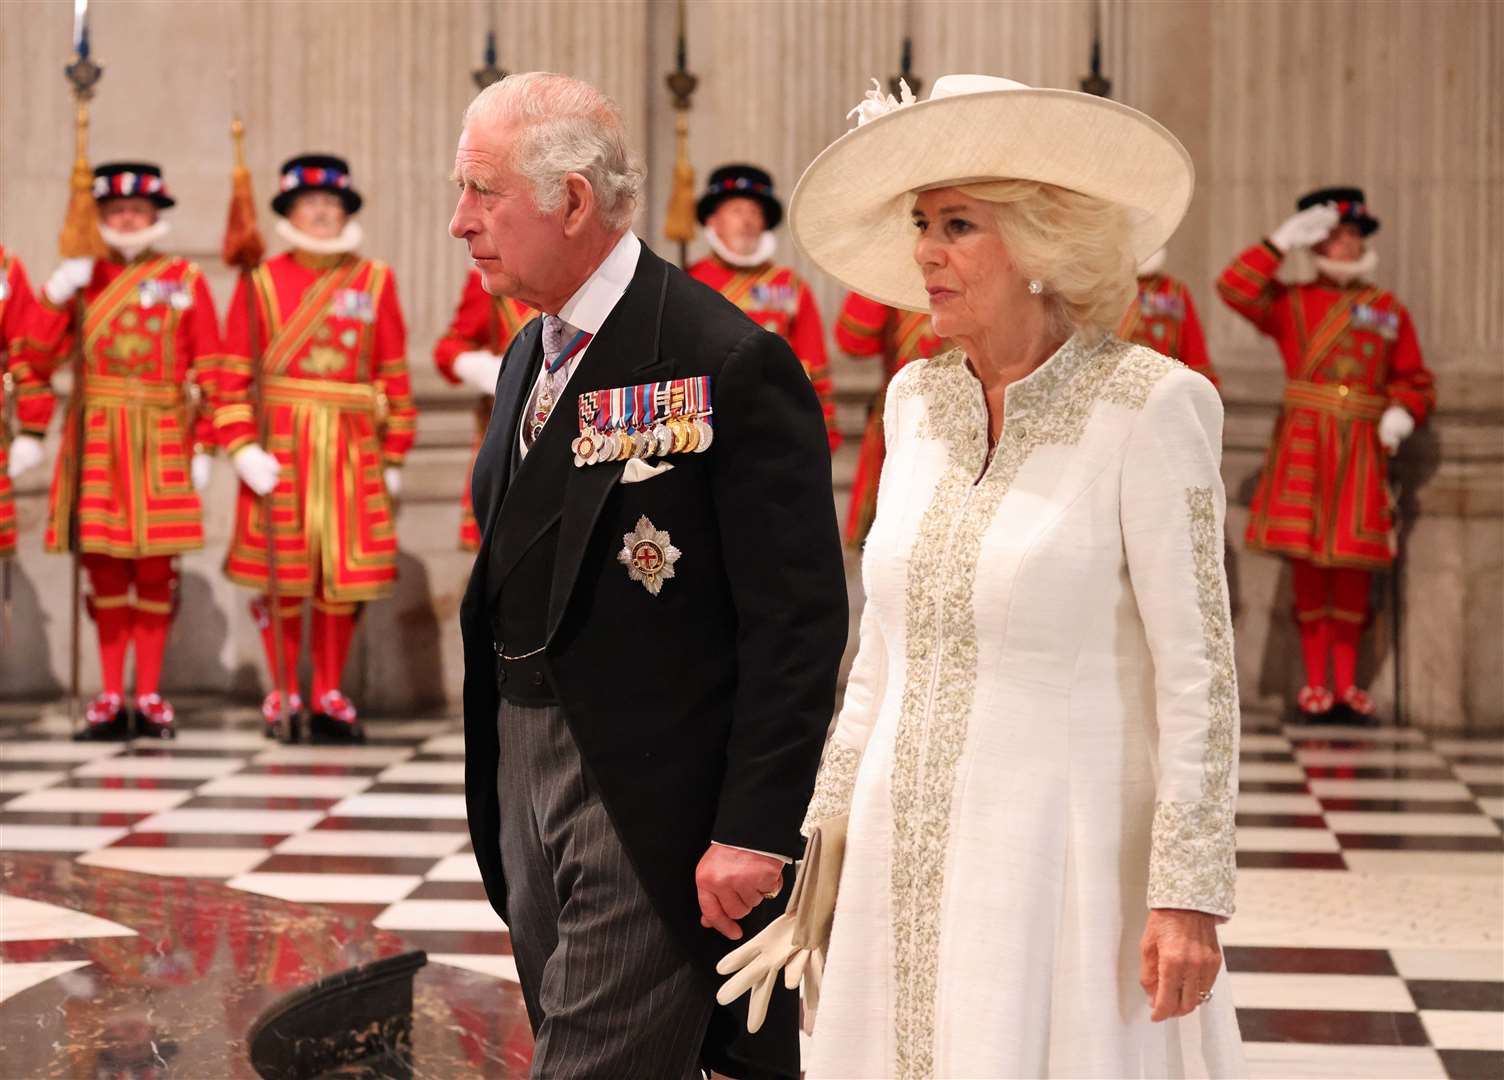 The Prince of Wales and the Duchess of Cornwall at the National Service of Thanksgiving at St Paul’s Cathedral in June (Richard Pohle/The Times/PA)